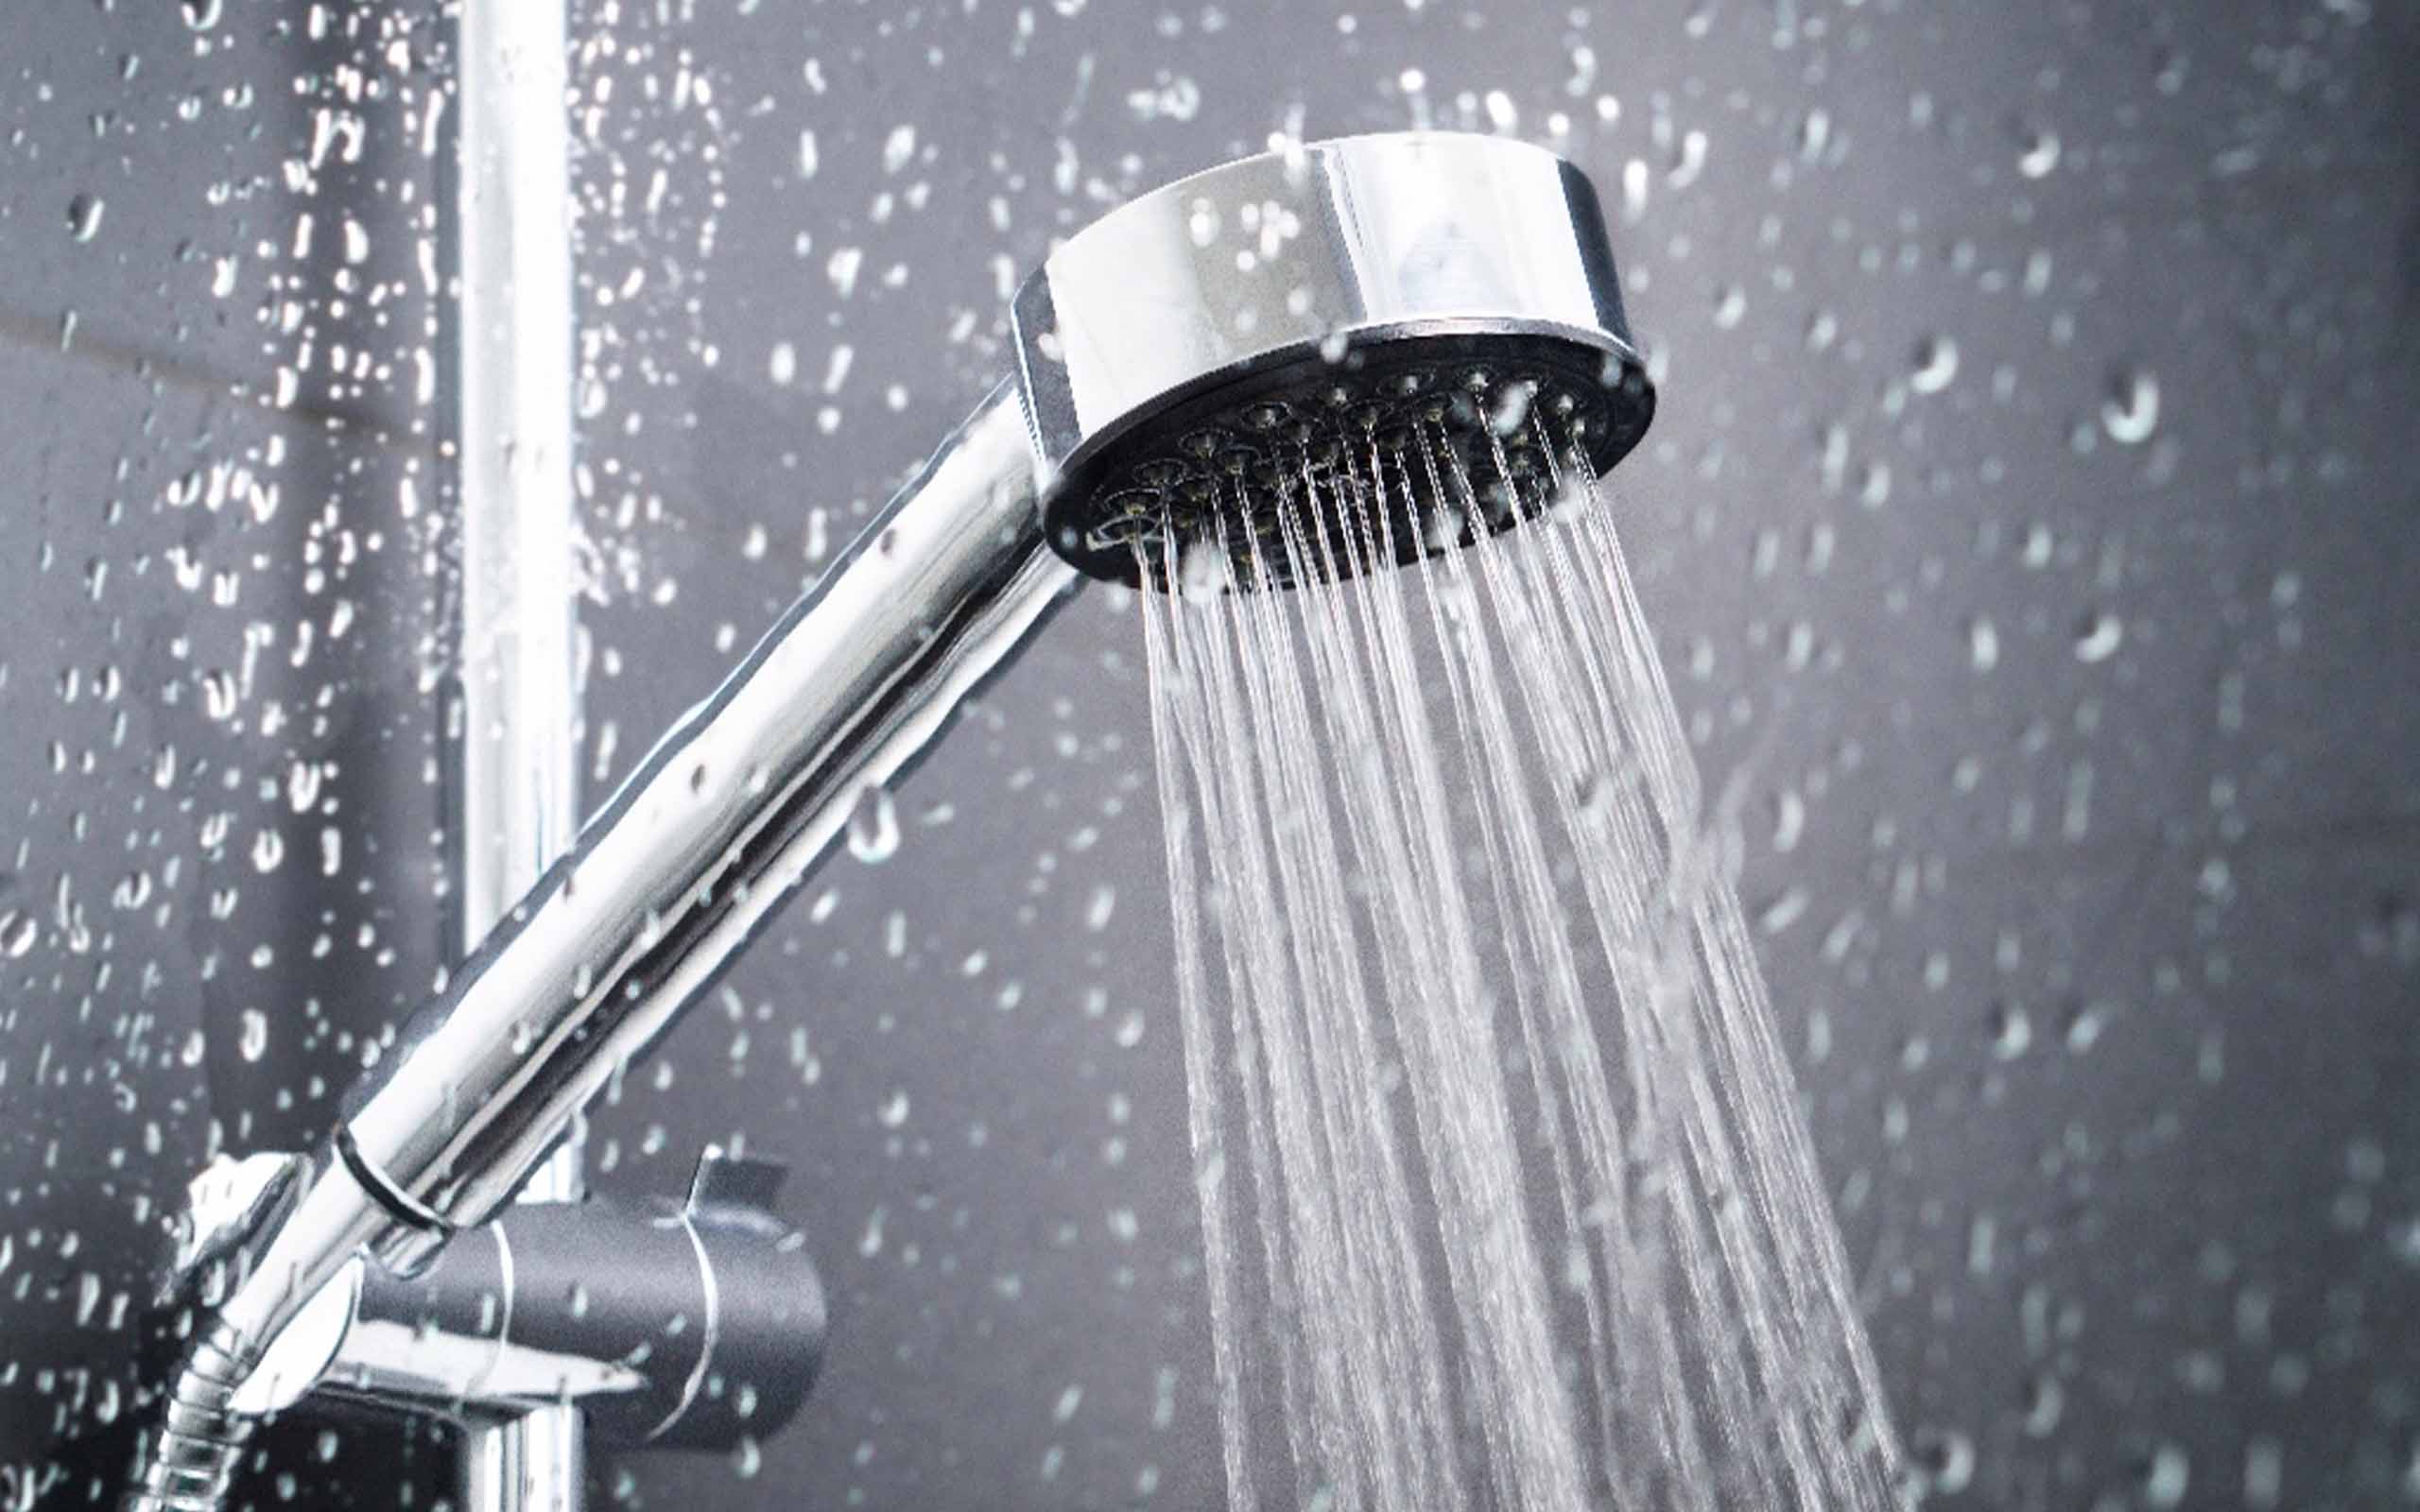 Stainless steel shower with water pouring out